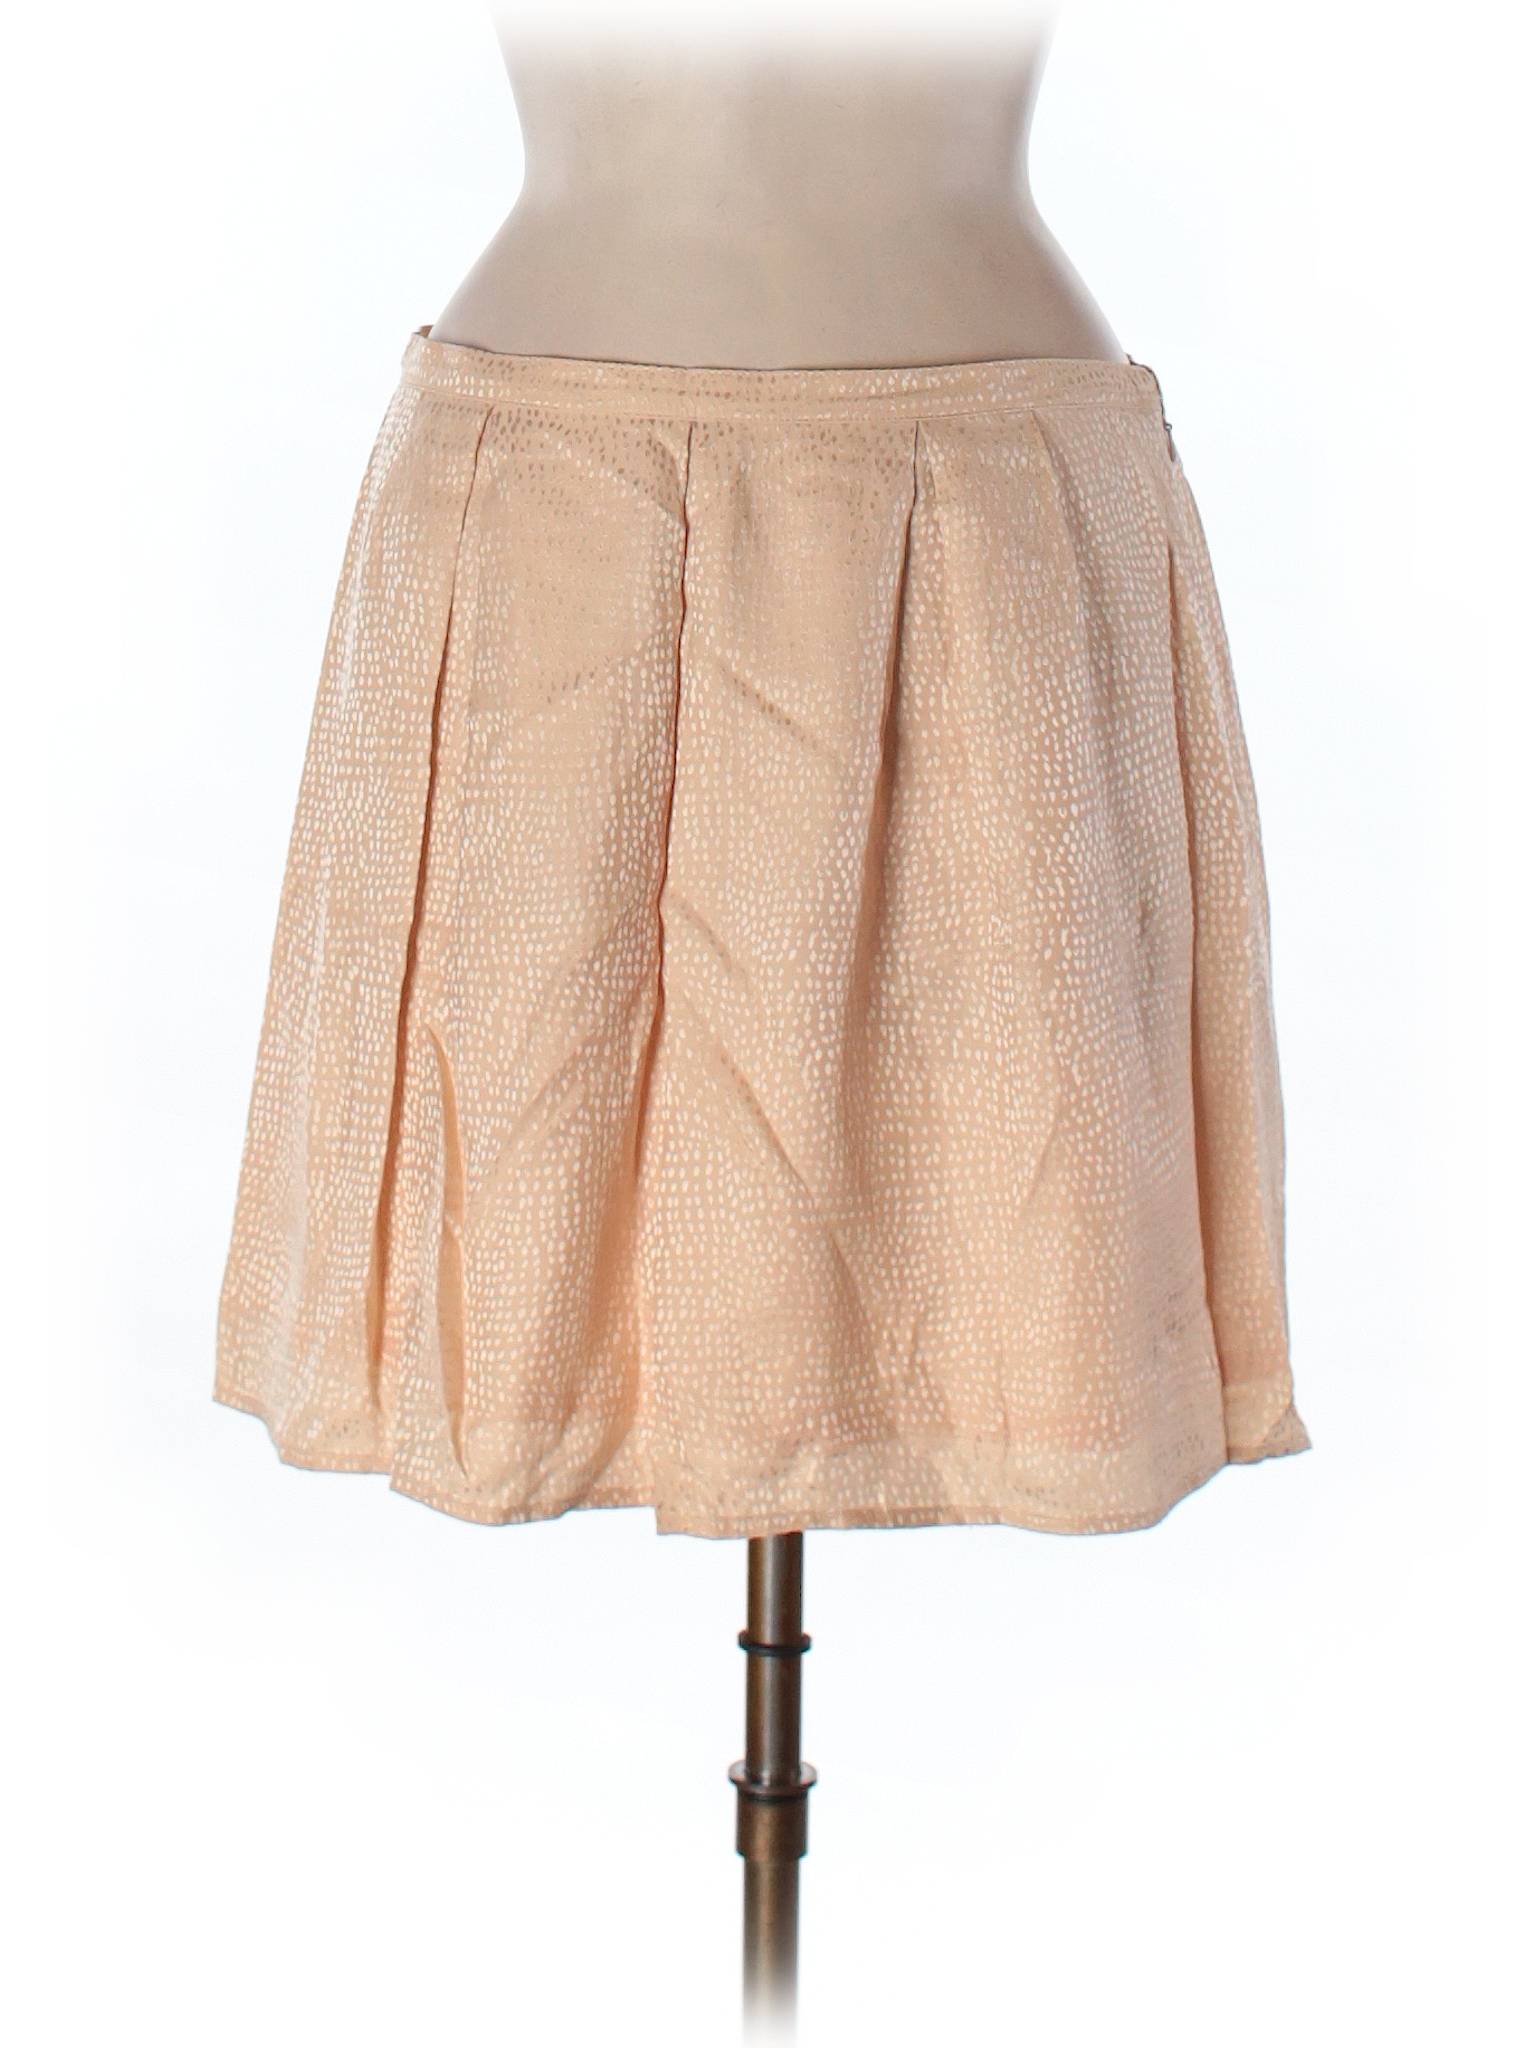 Broadway & Broome Silk Skirt - 87% off only on thredUP